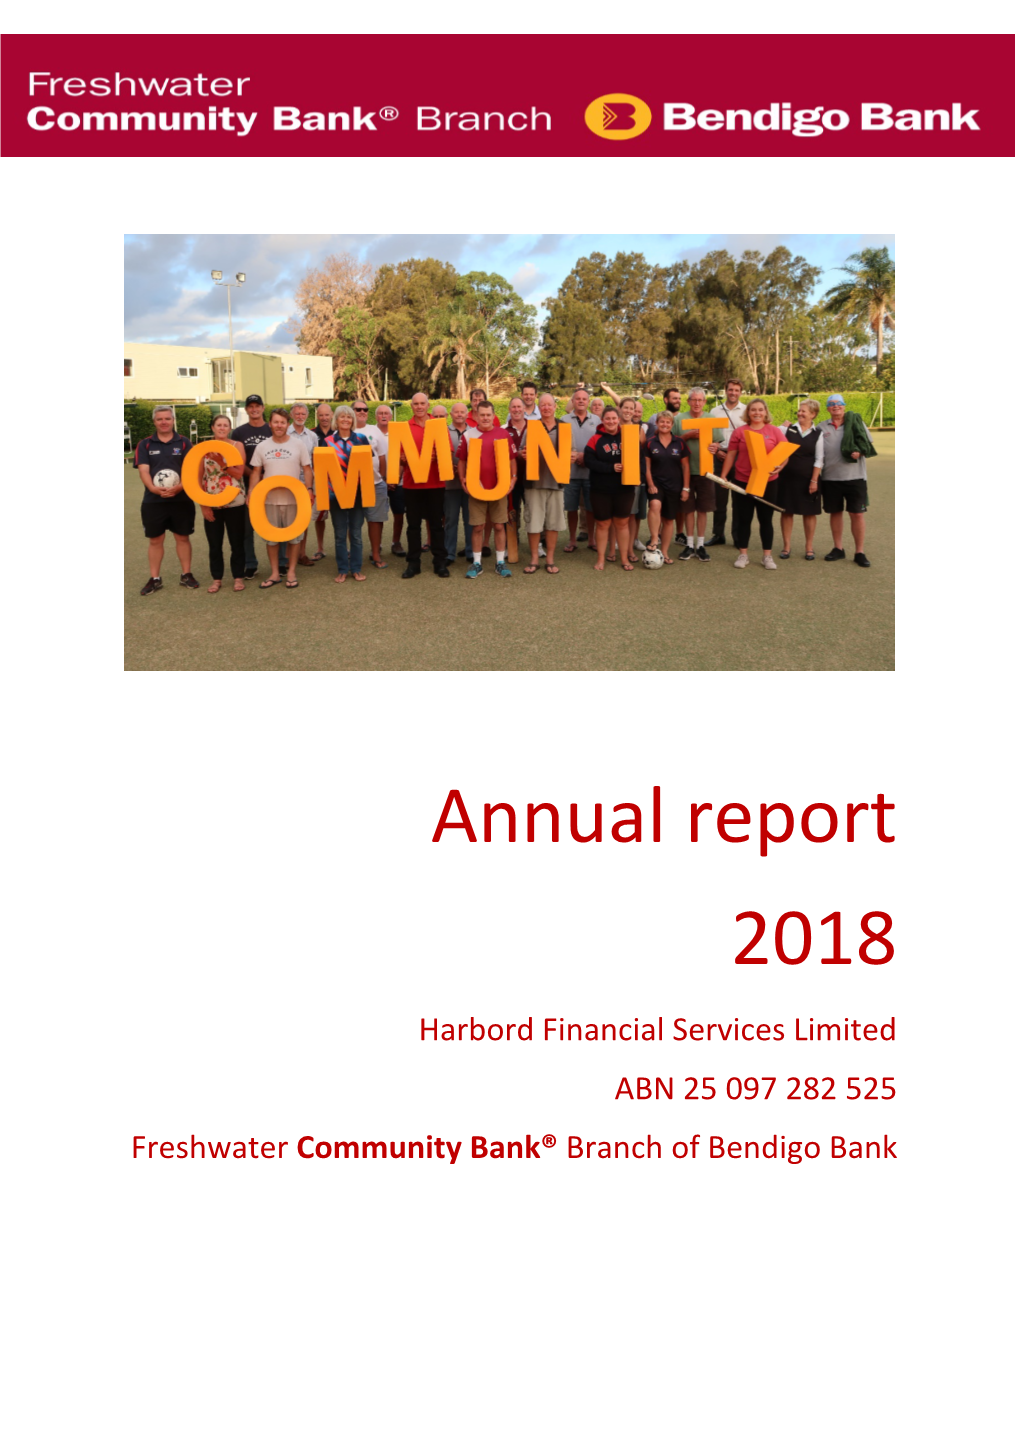 Annual Report 2018 Harbord Financial Services Limited ABN 25 097 282 525